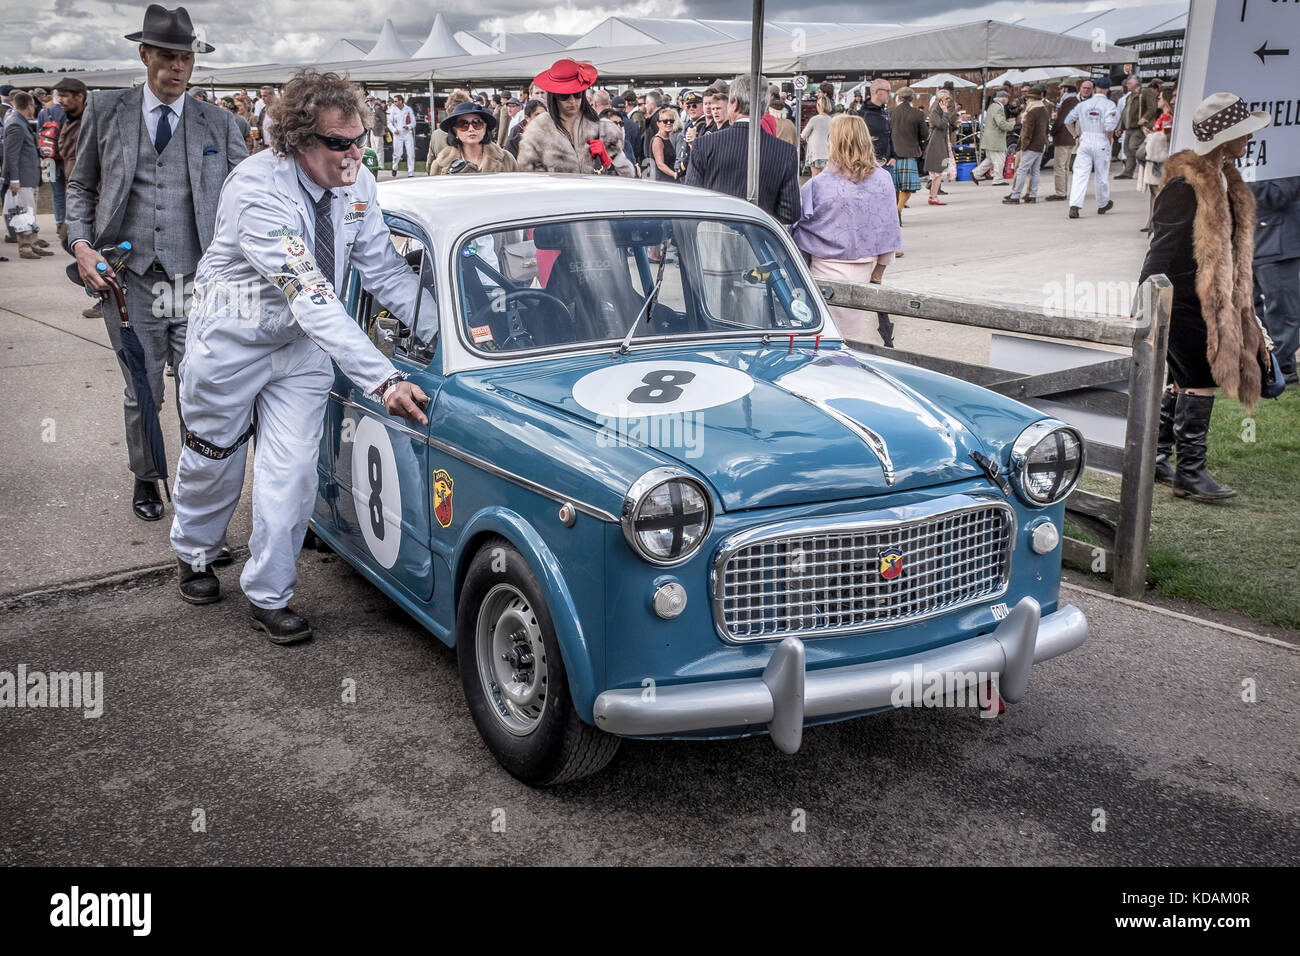 Peter James' 1958 Fiat Abarth Evocation is pushed through the paddock at the 2017 Goodwood Revival, Sussex, UK. St Mary's Trophy entrant. Stock Photo